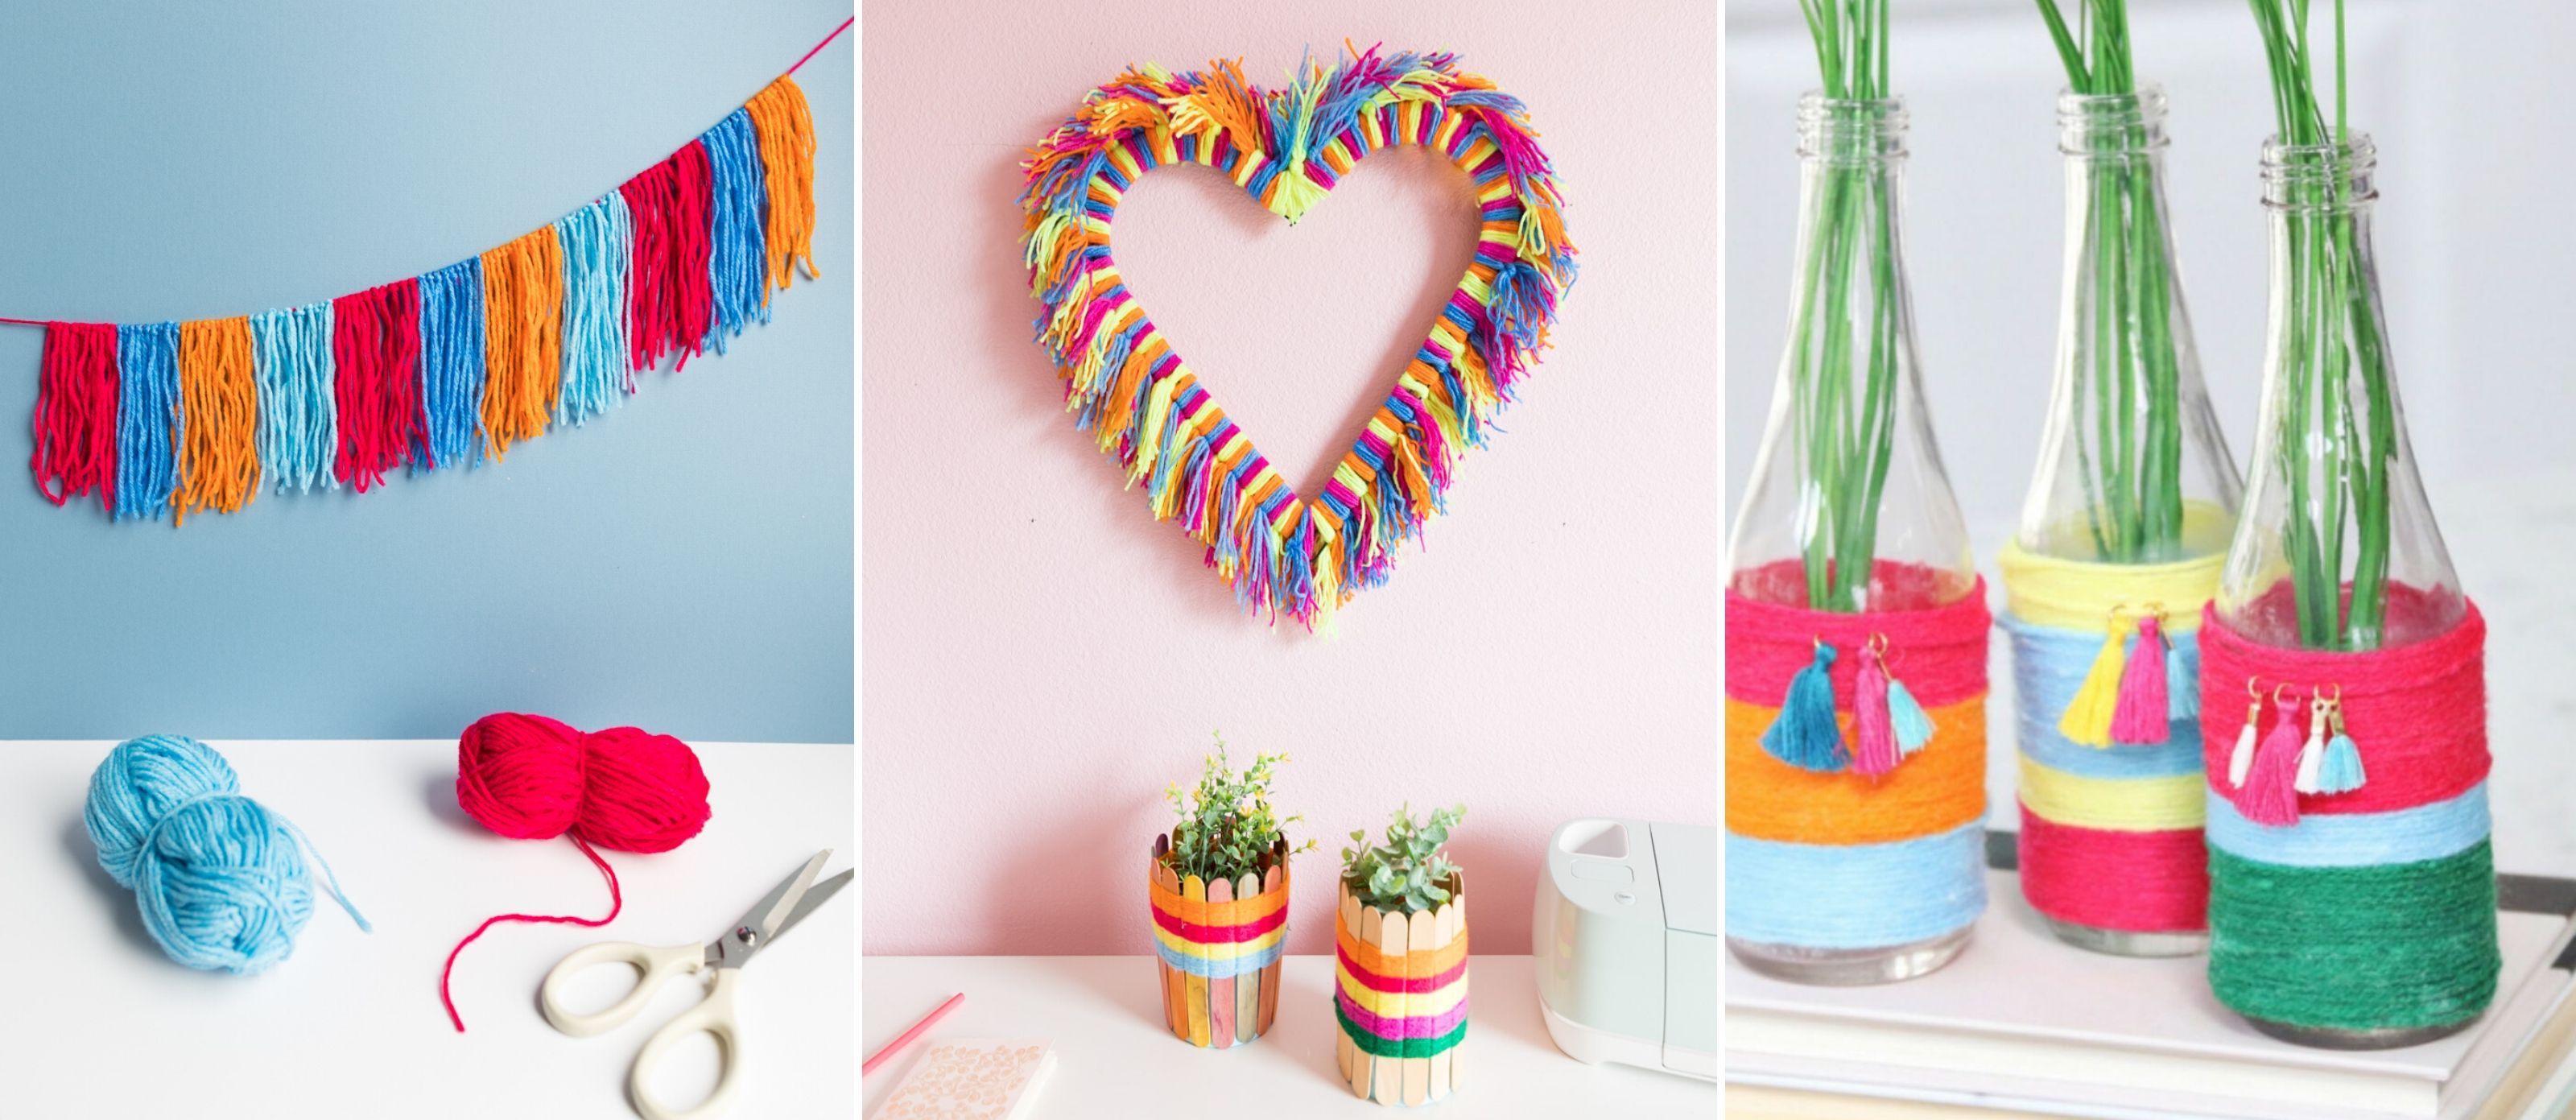 7 Easy Yarn Crafts to Make Now